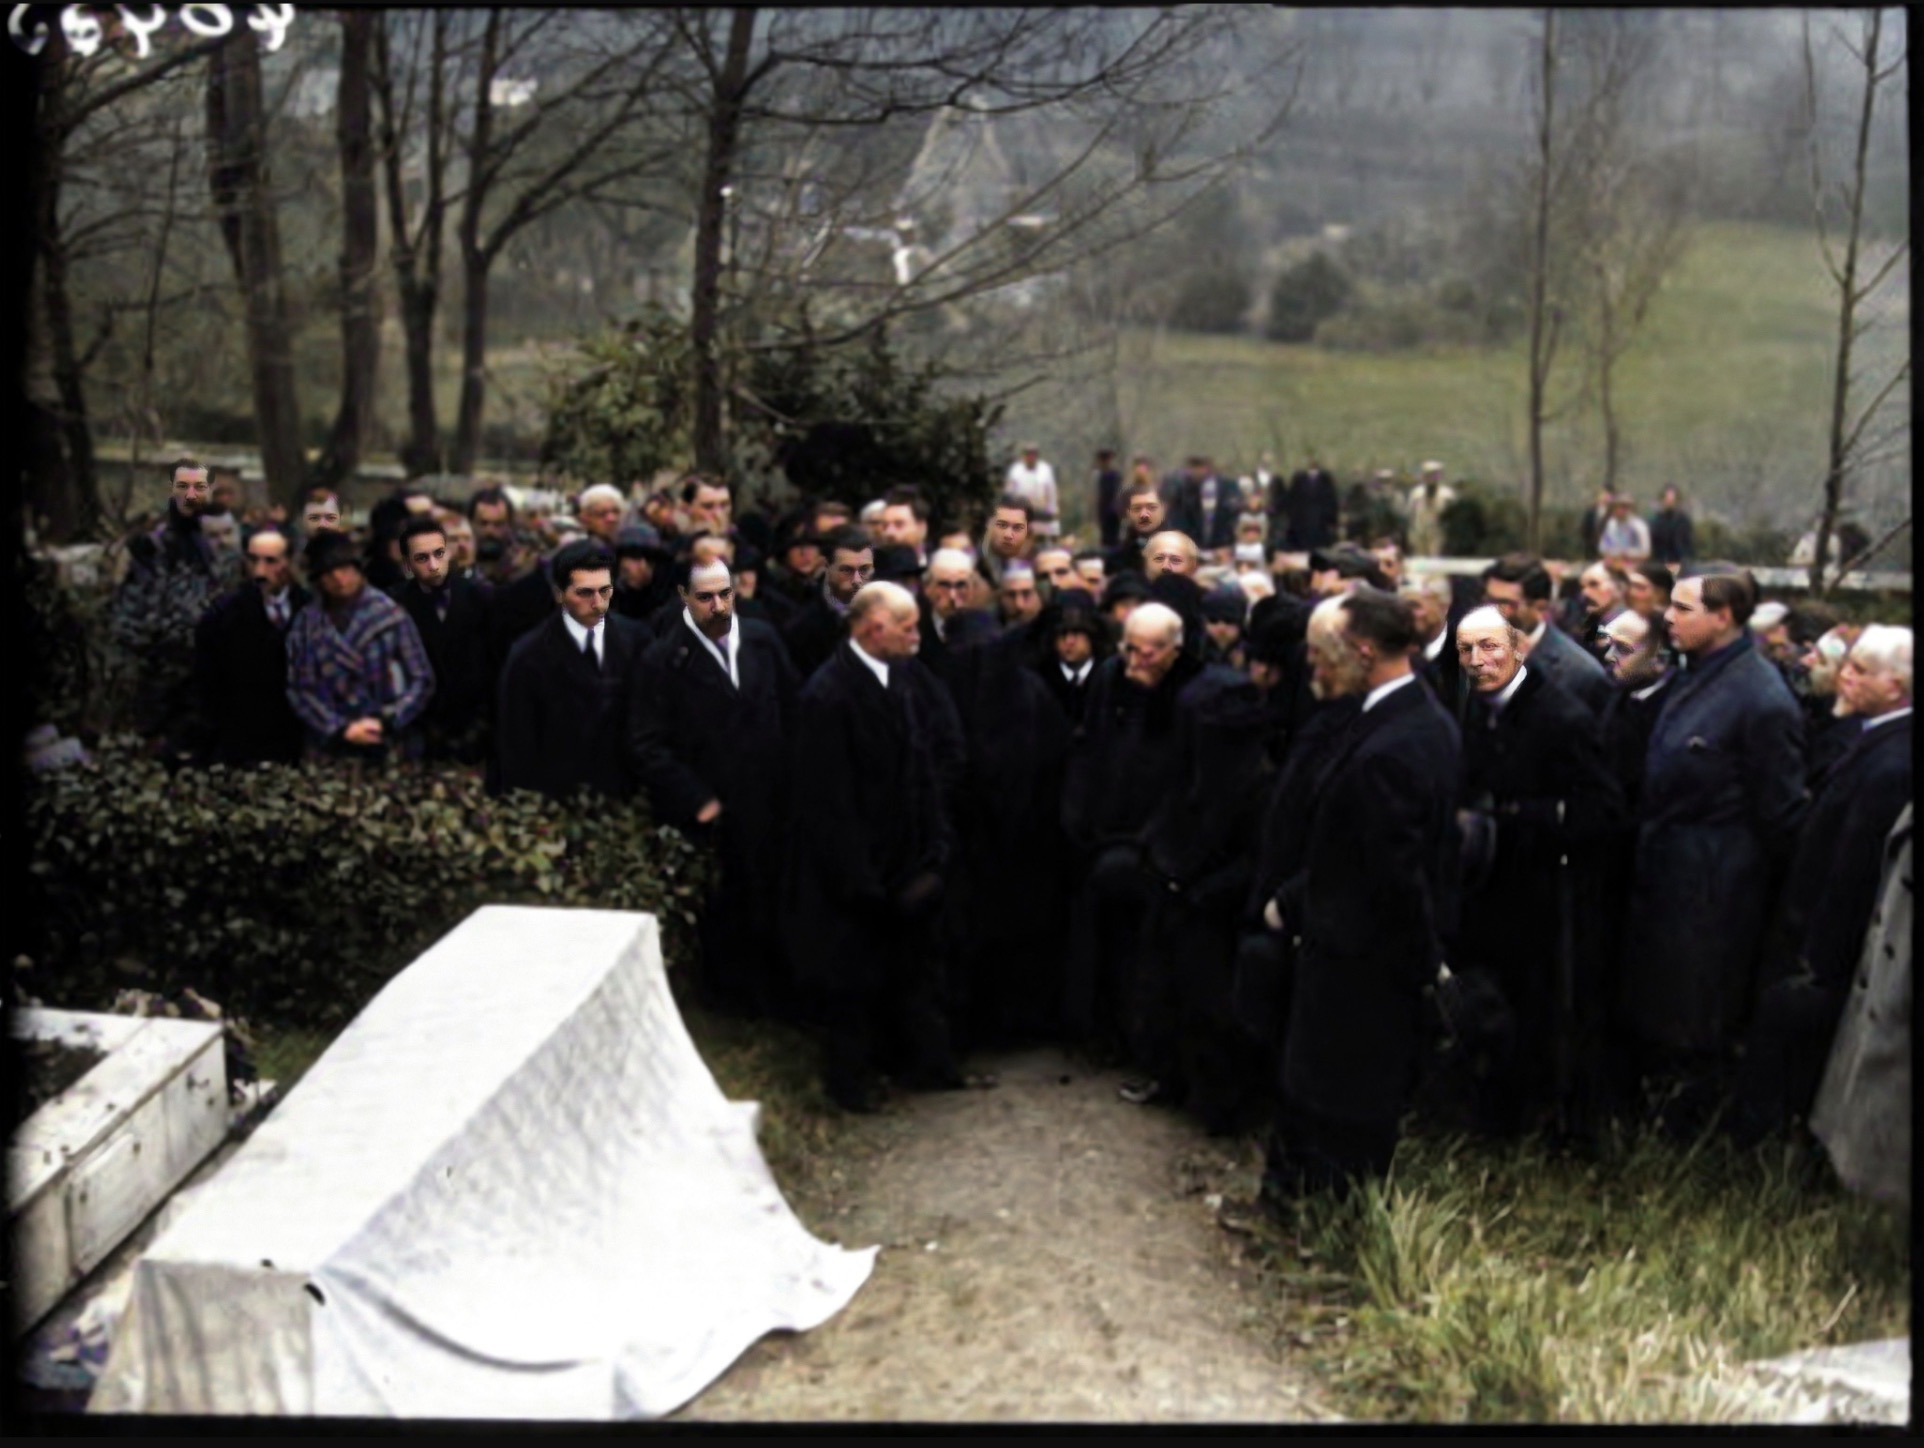 Monet's Funeral - no black over the coffin